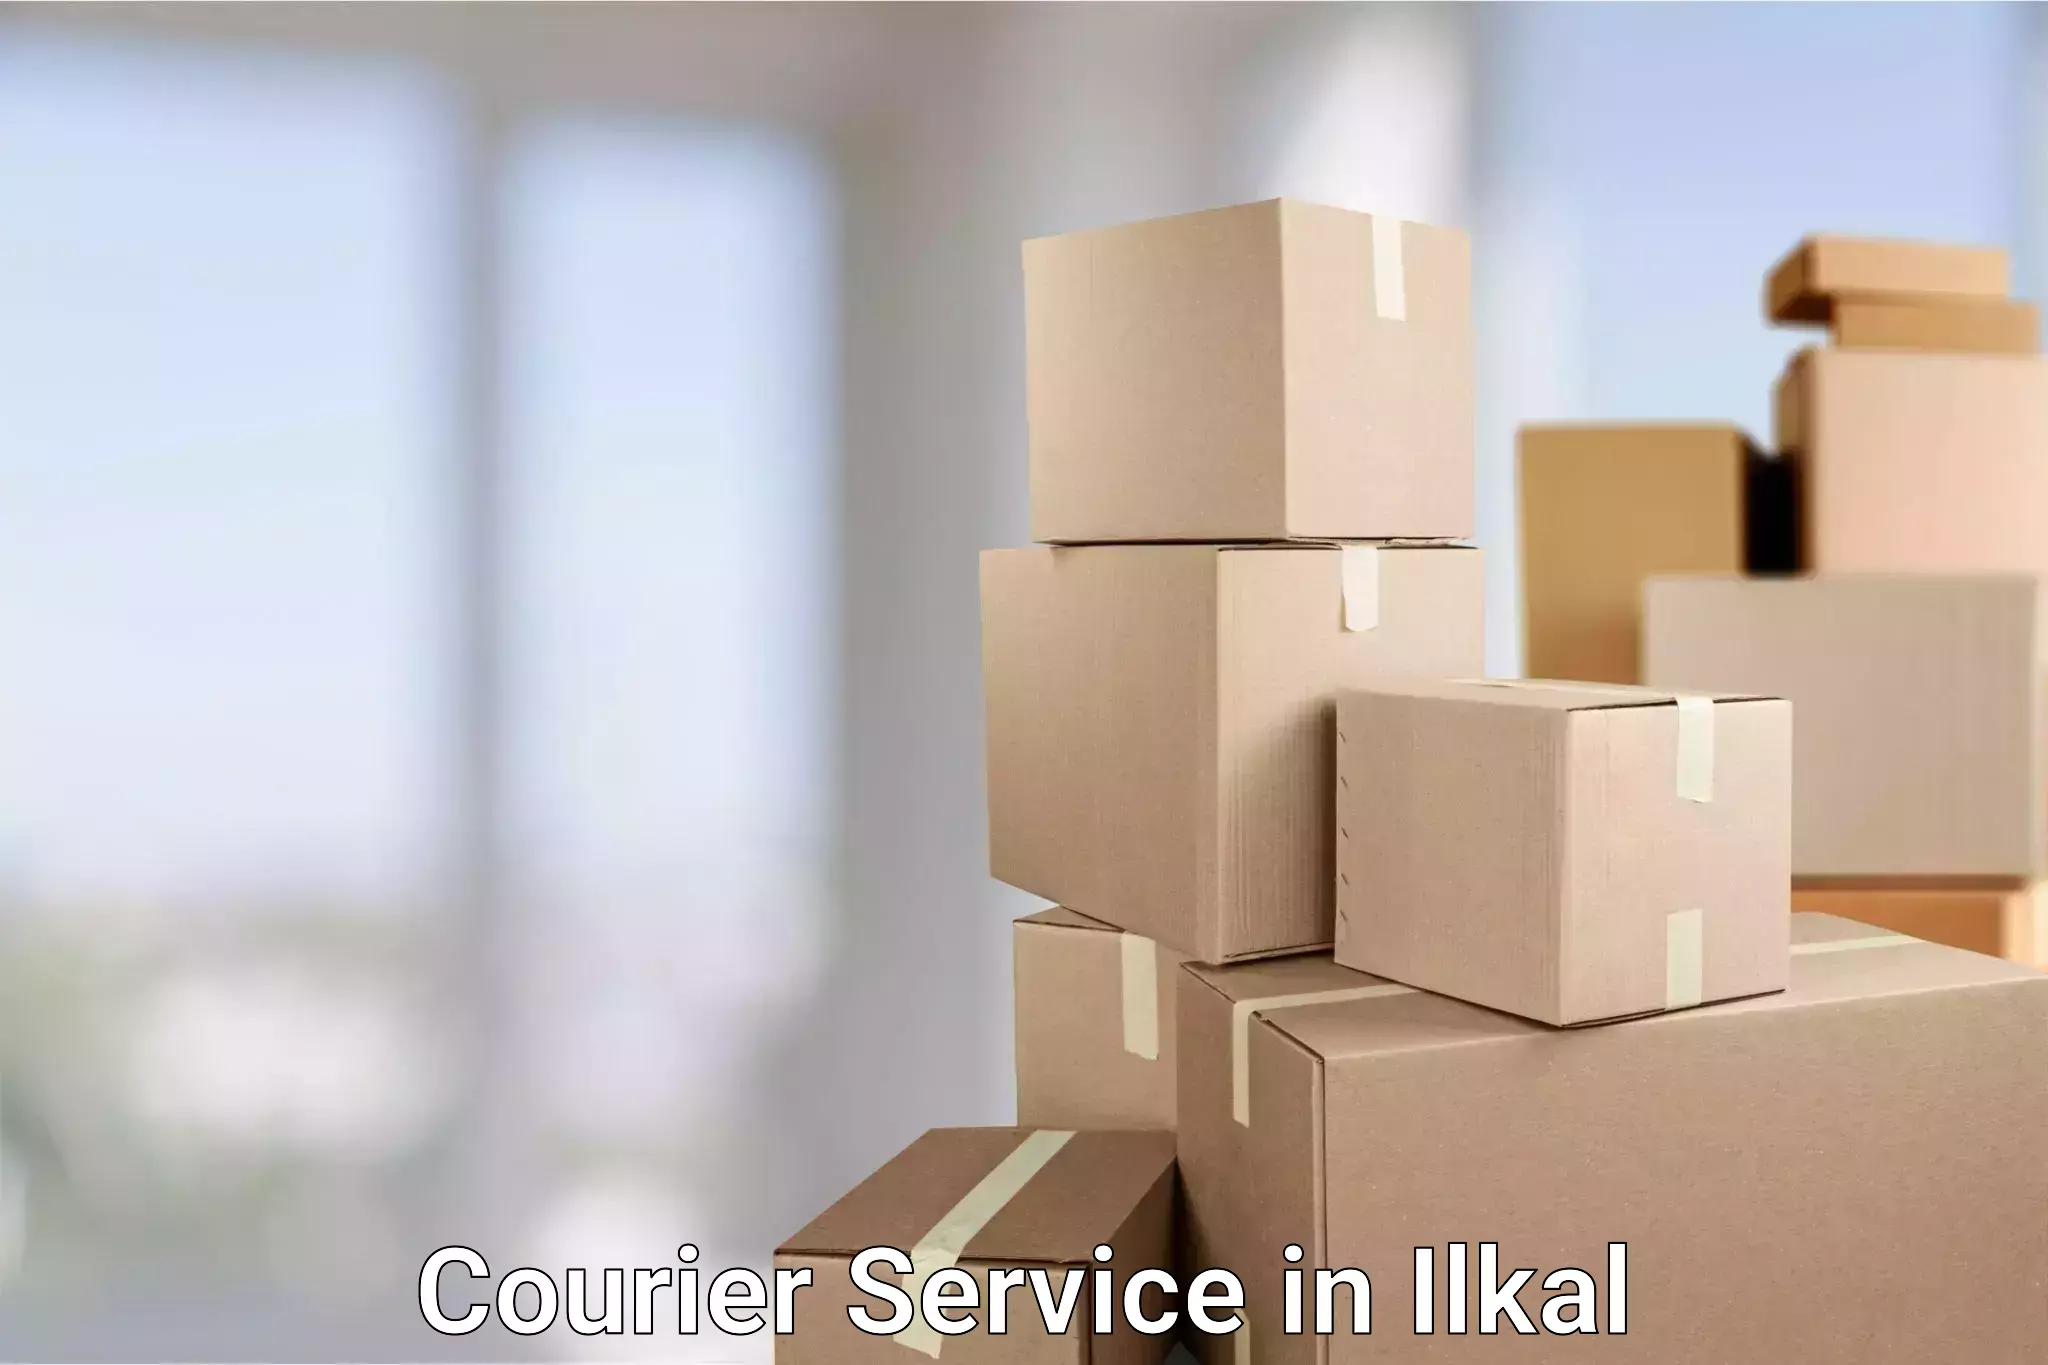 Secure package delivery in Ilkal